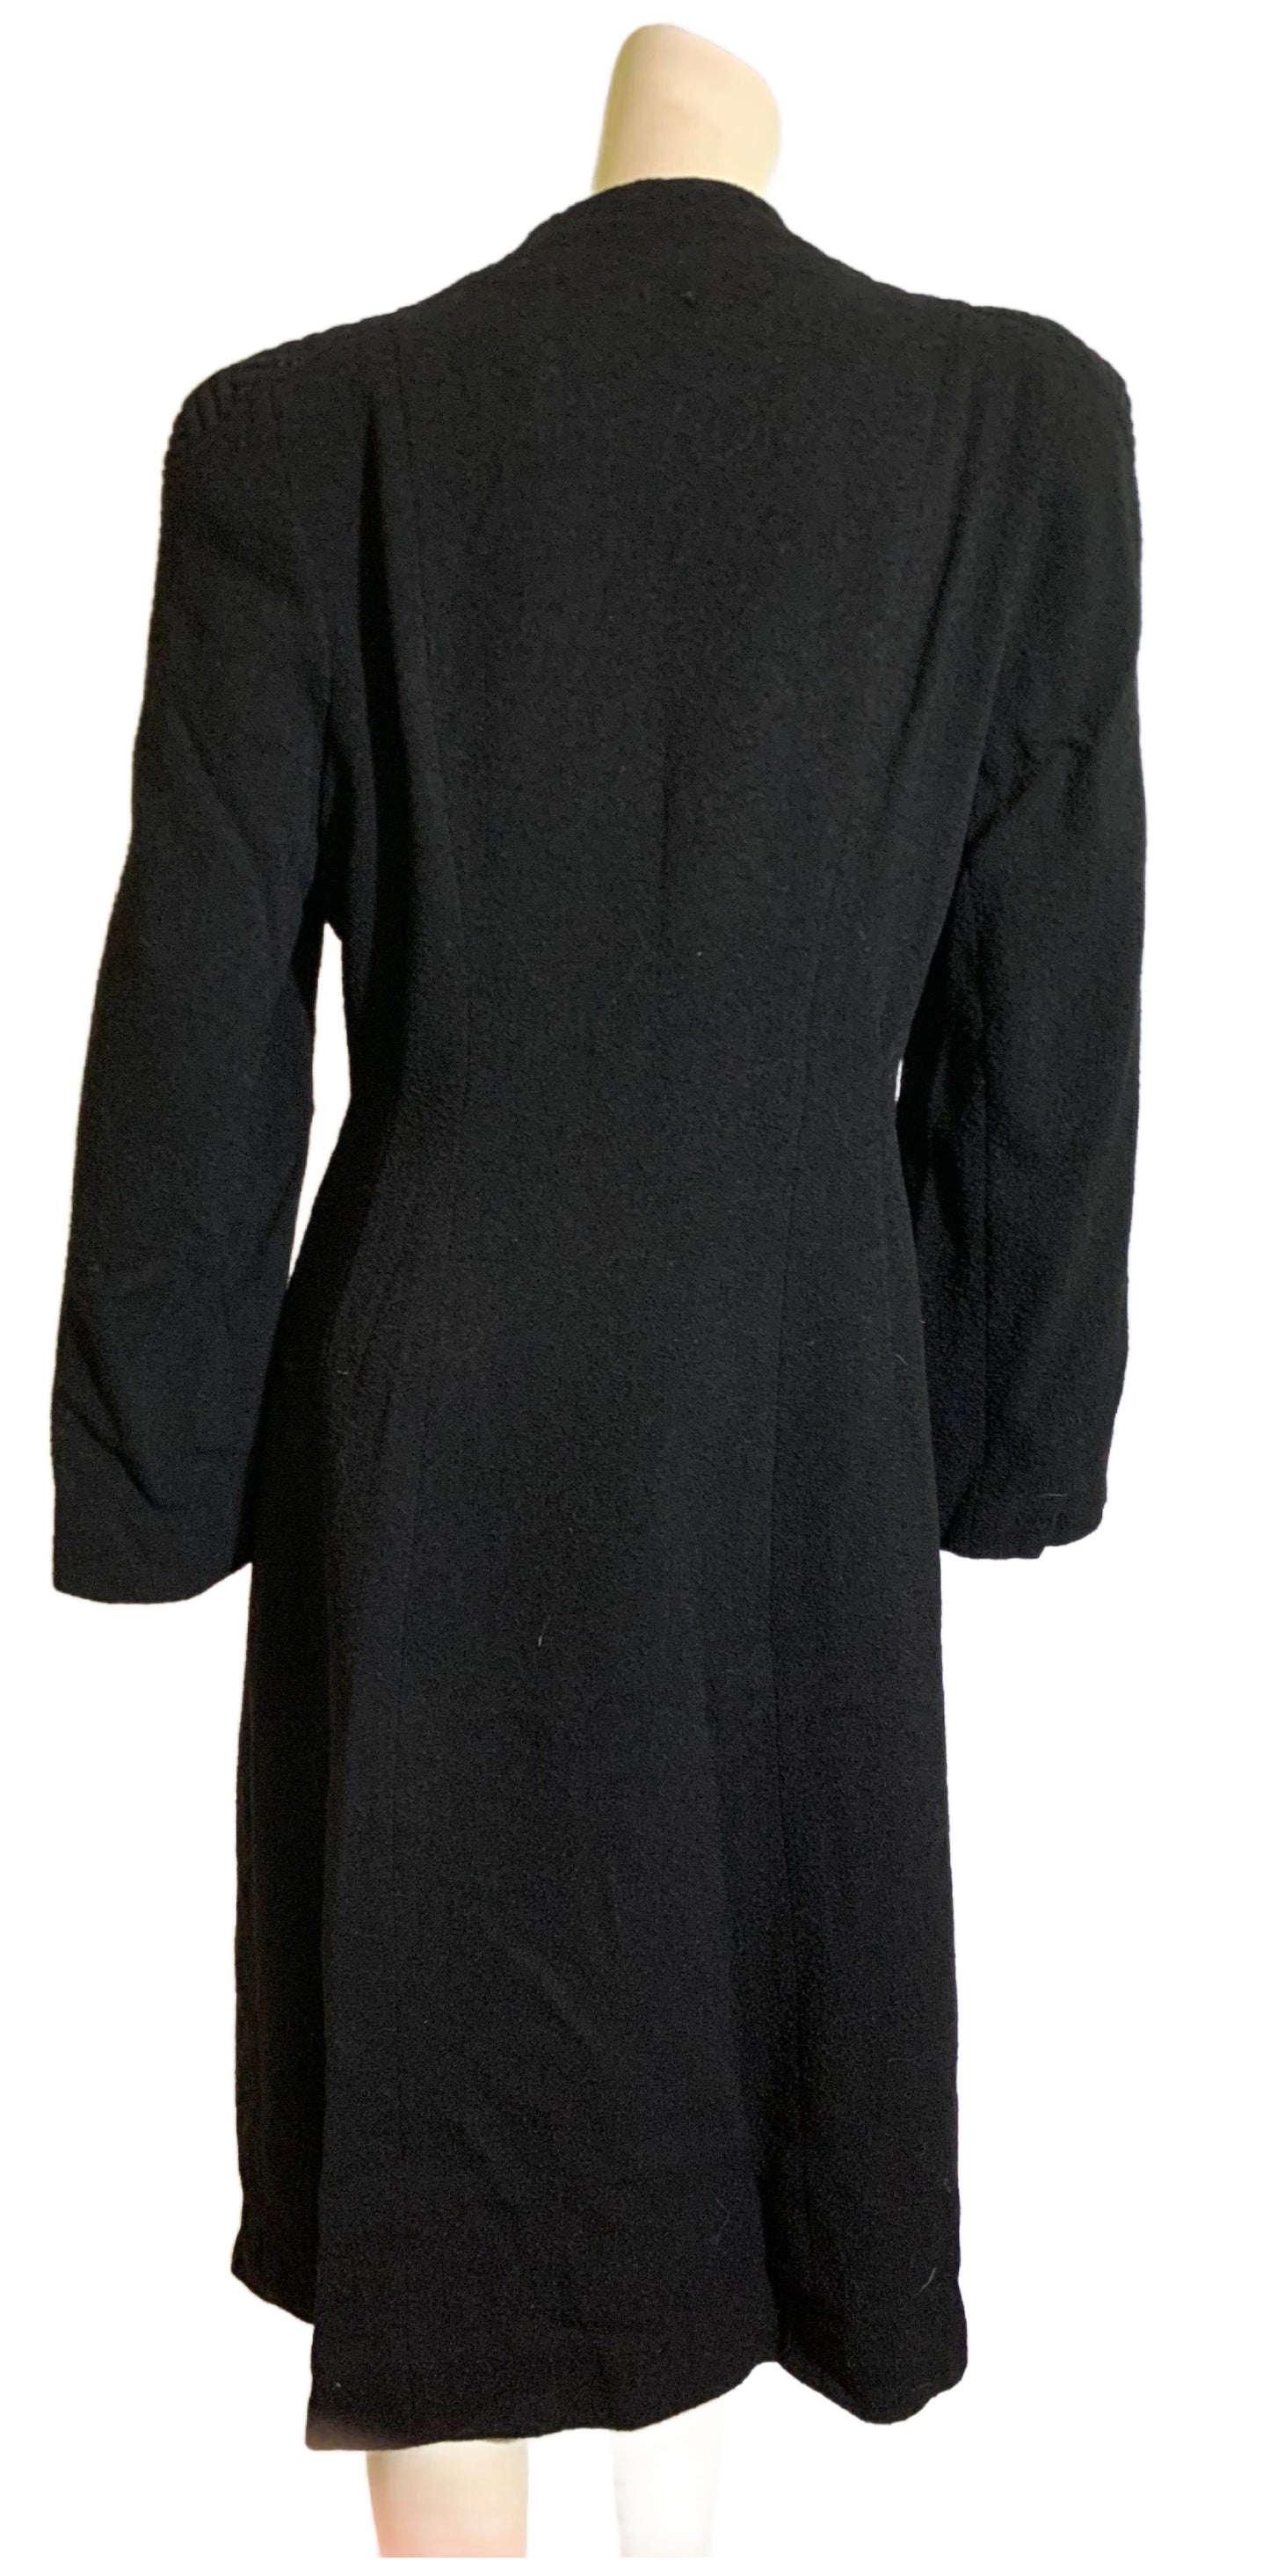 Nipped Waist Black Textured Wool Coat with Trapunto Stitched Shoulders circa 1940s